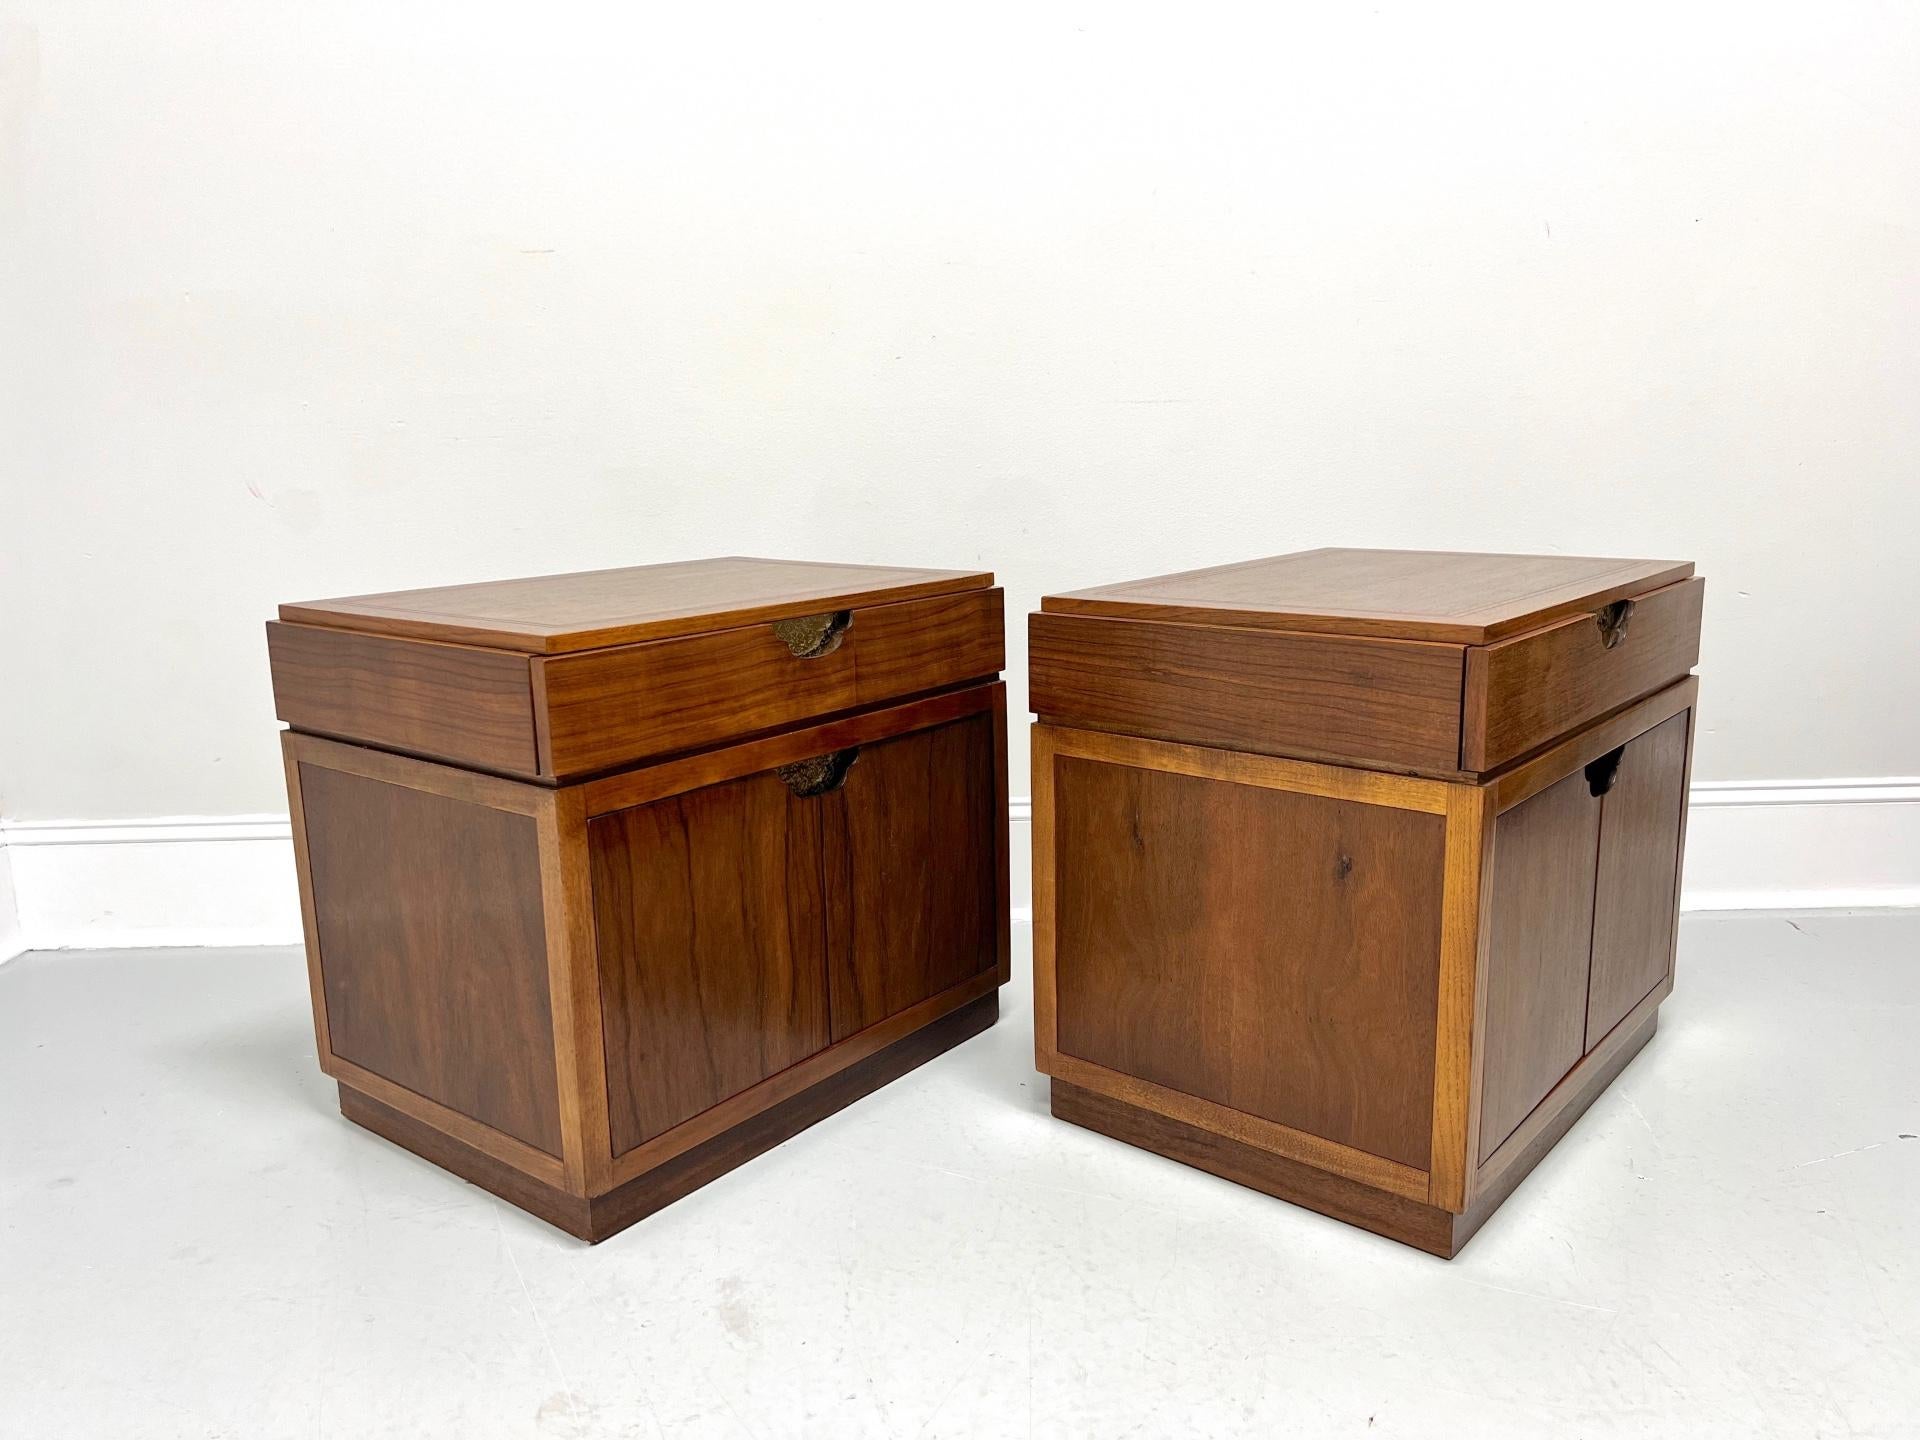 Chinoiserie BAKER Mid 20th Century Rosewood & Walnut Asian Inspired Nightstands - Pair For Sale